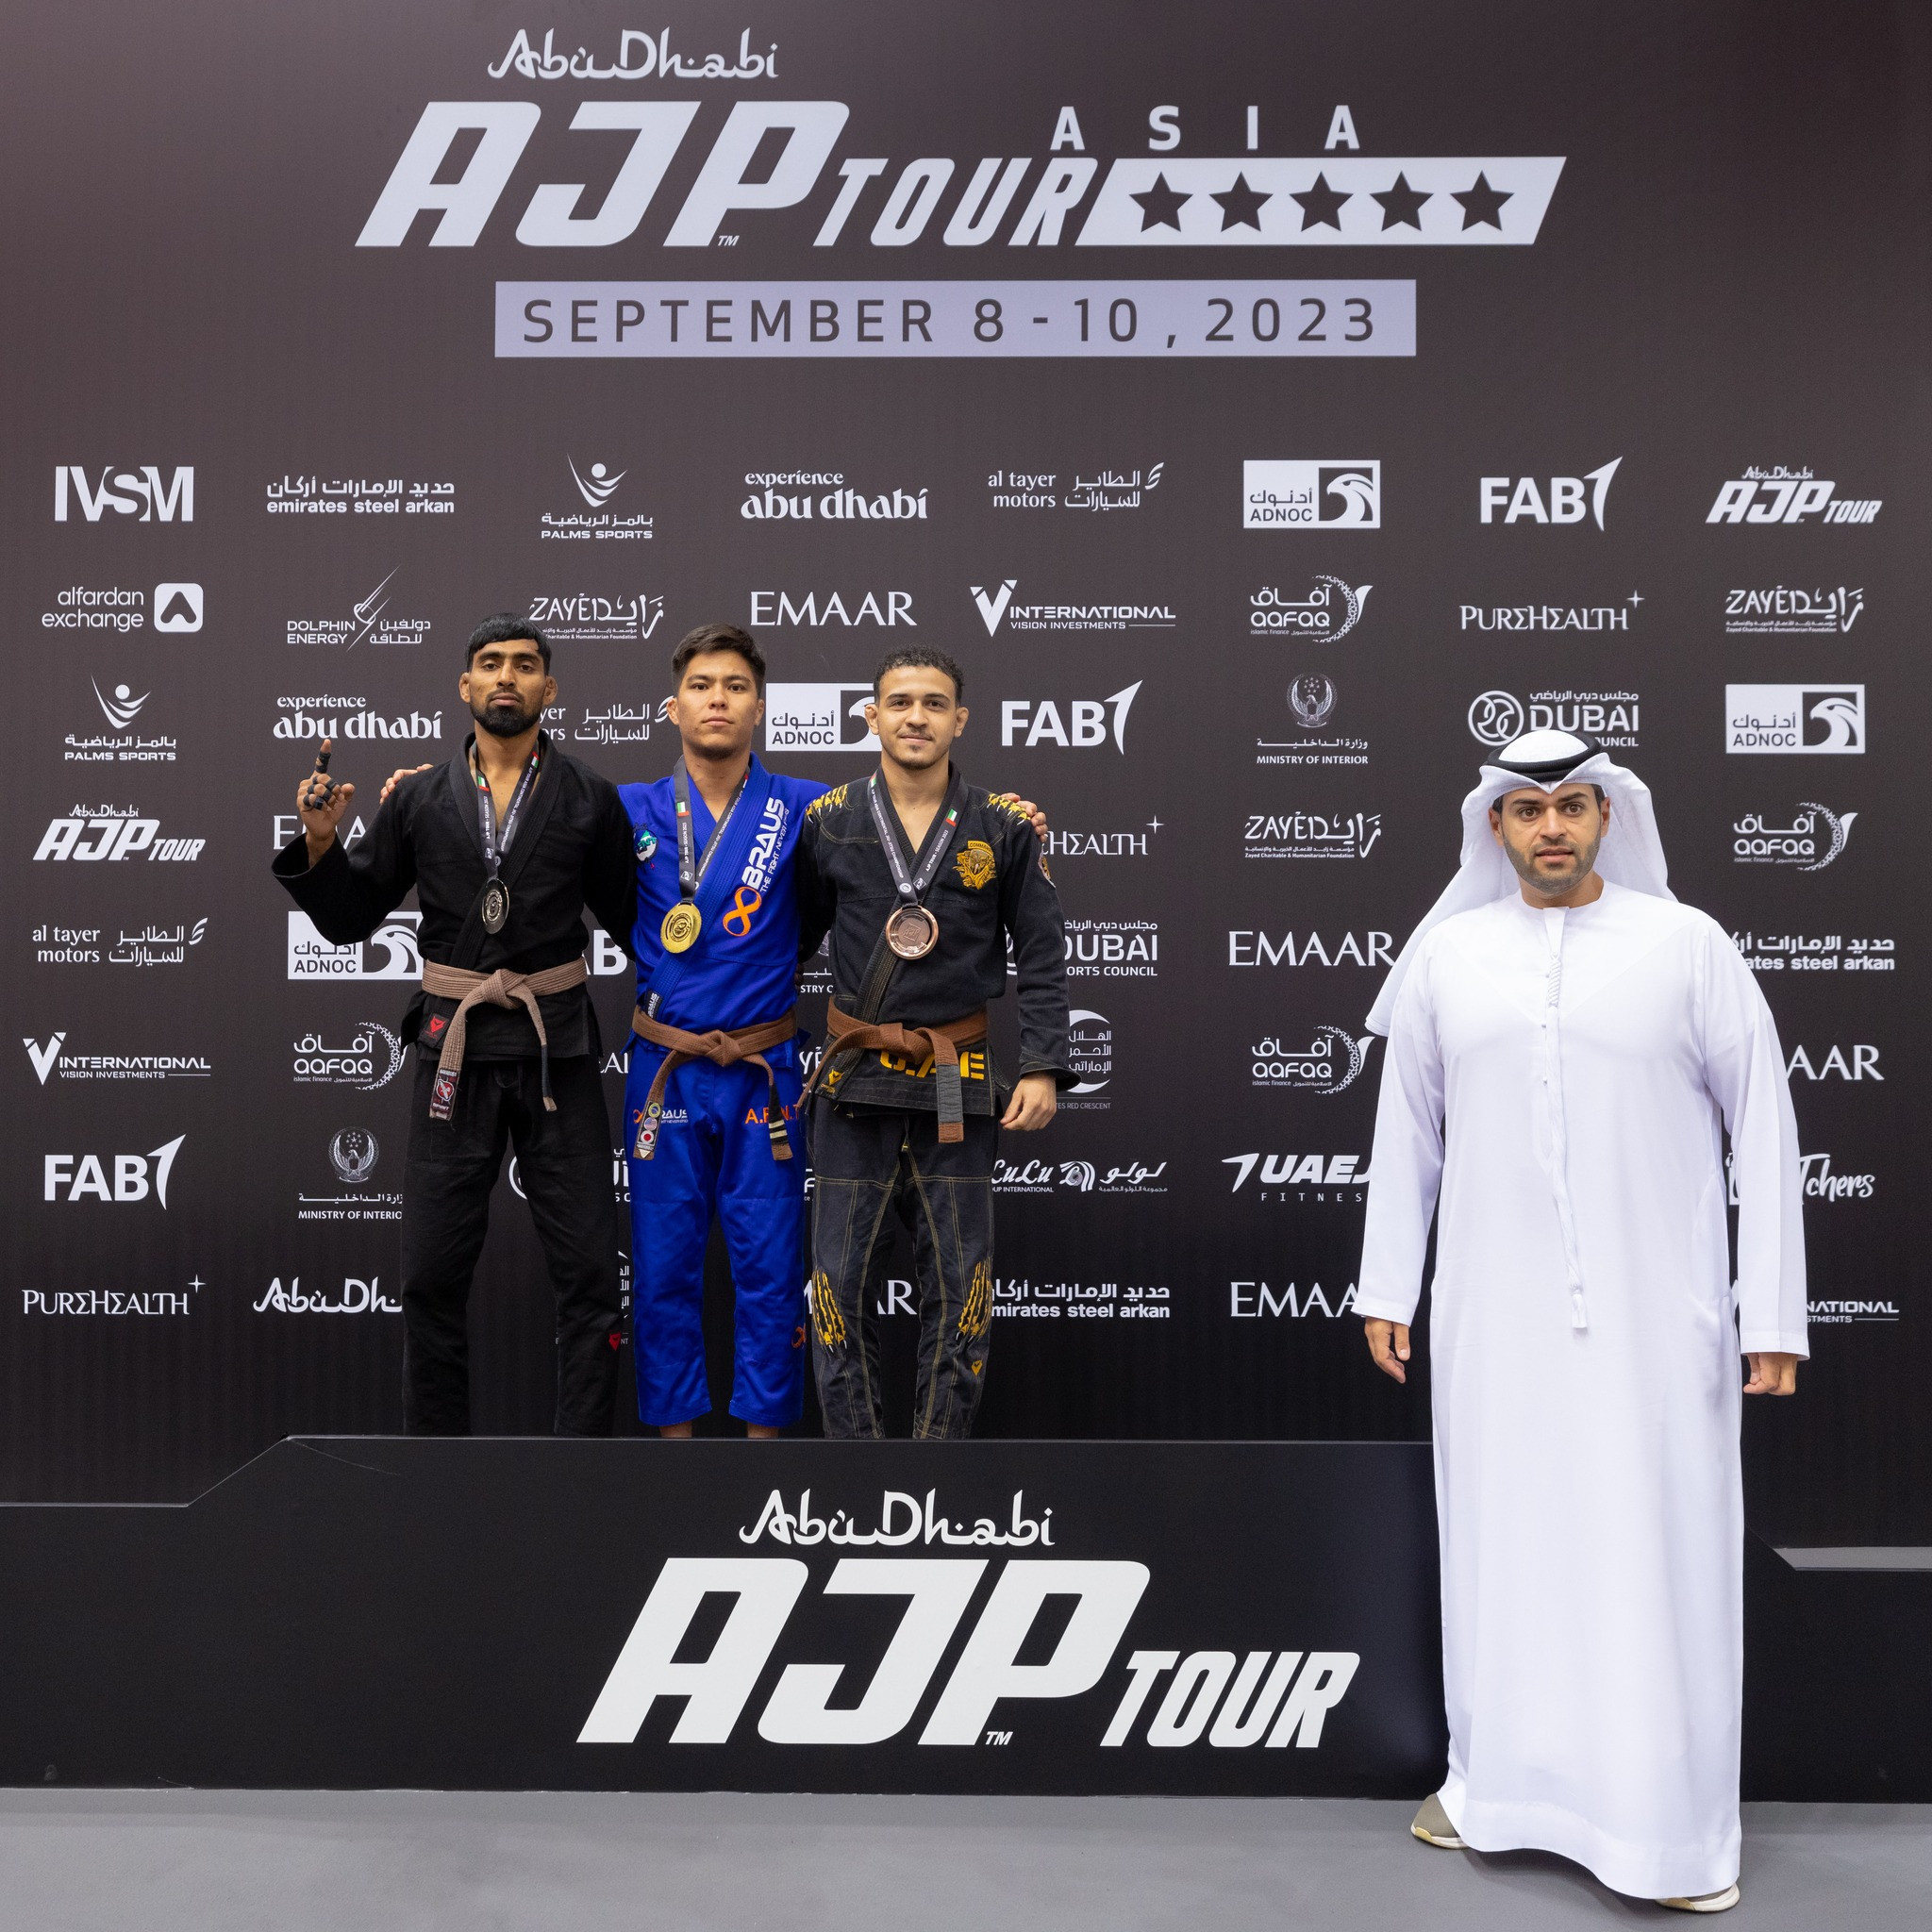 The UAE's AFNT were crowned overall winners in the professional category at the 2023 AJP Tour Asia Continental Jiu-Jitsu Championship ©AJP Tour